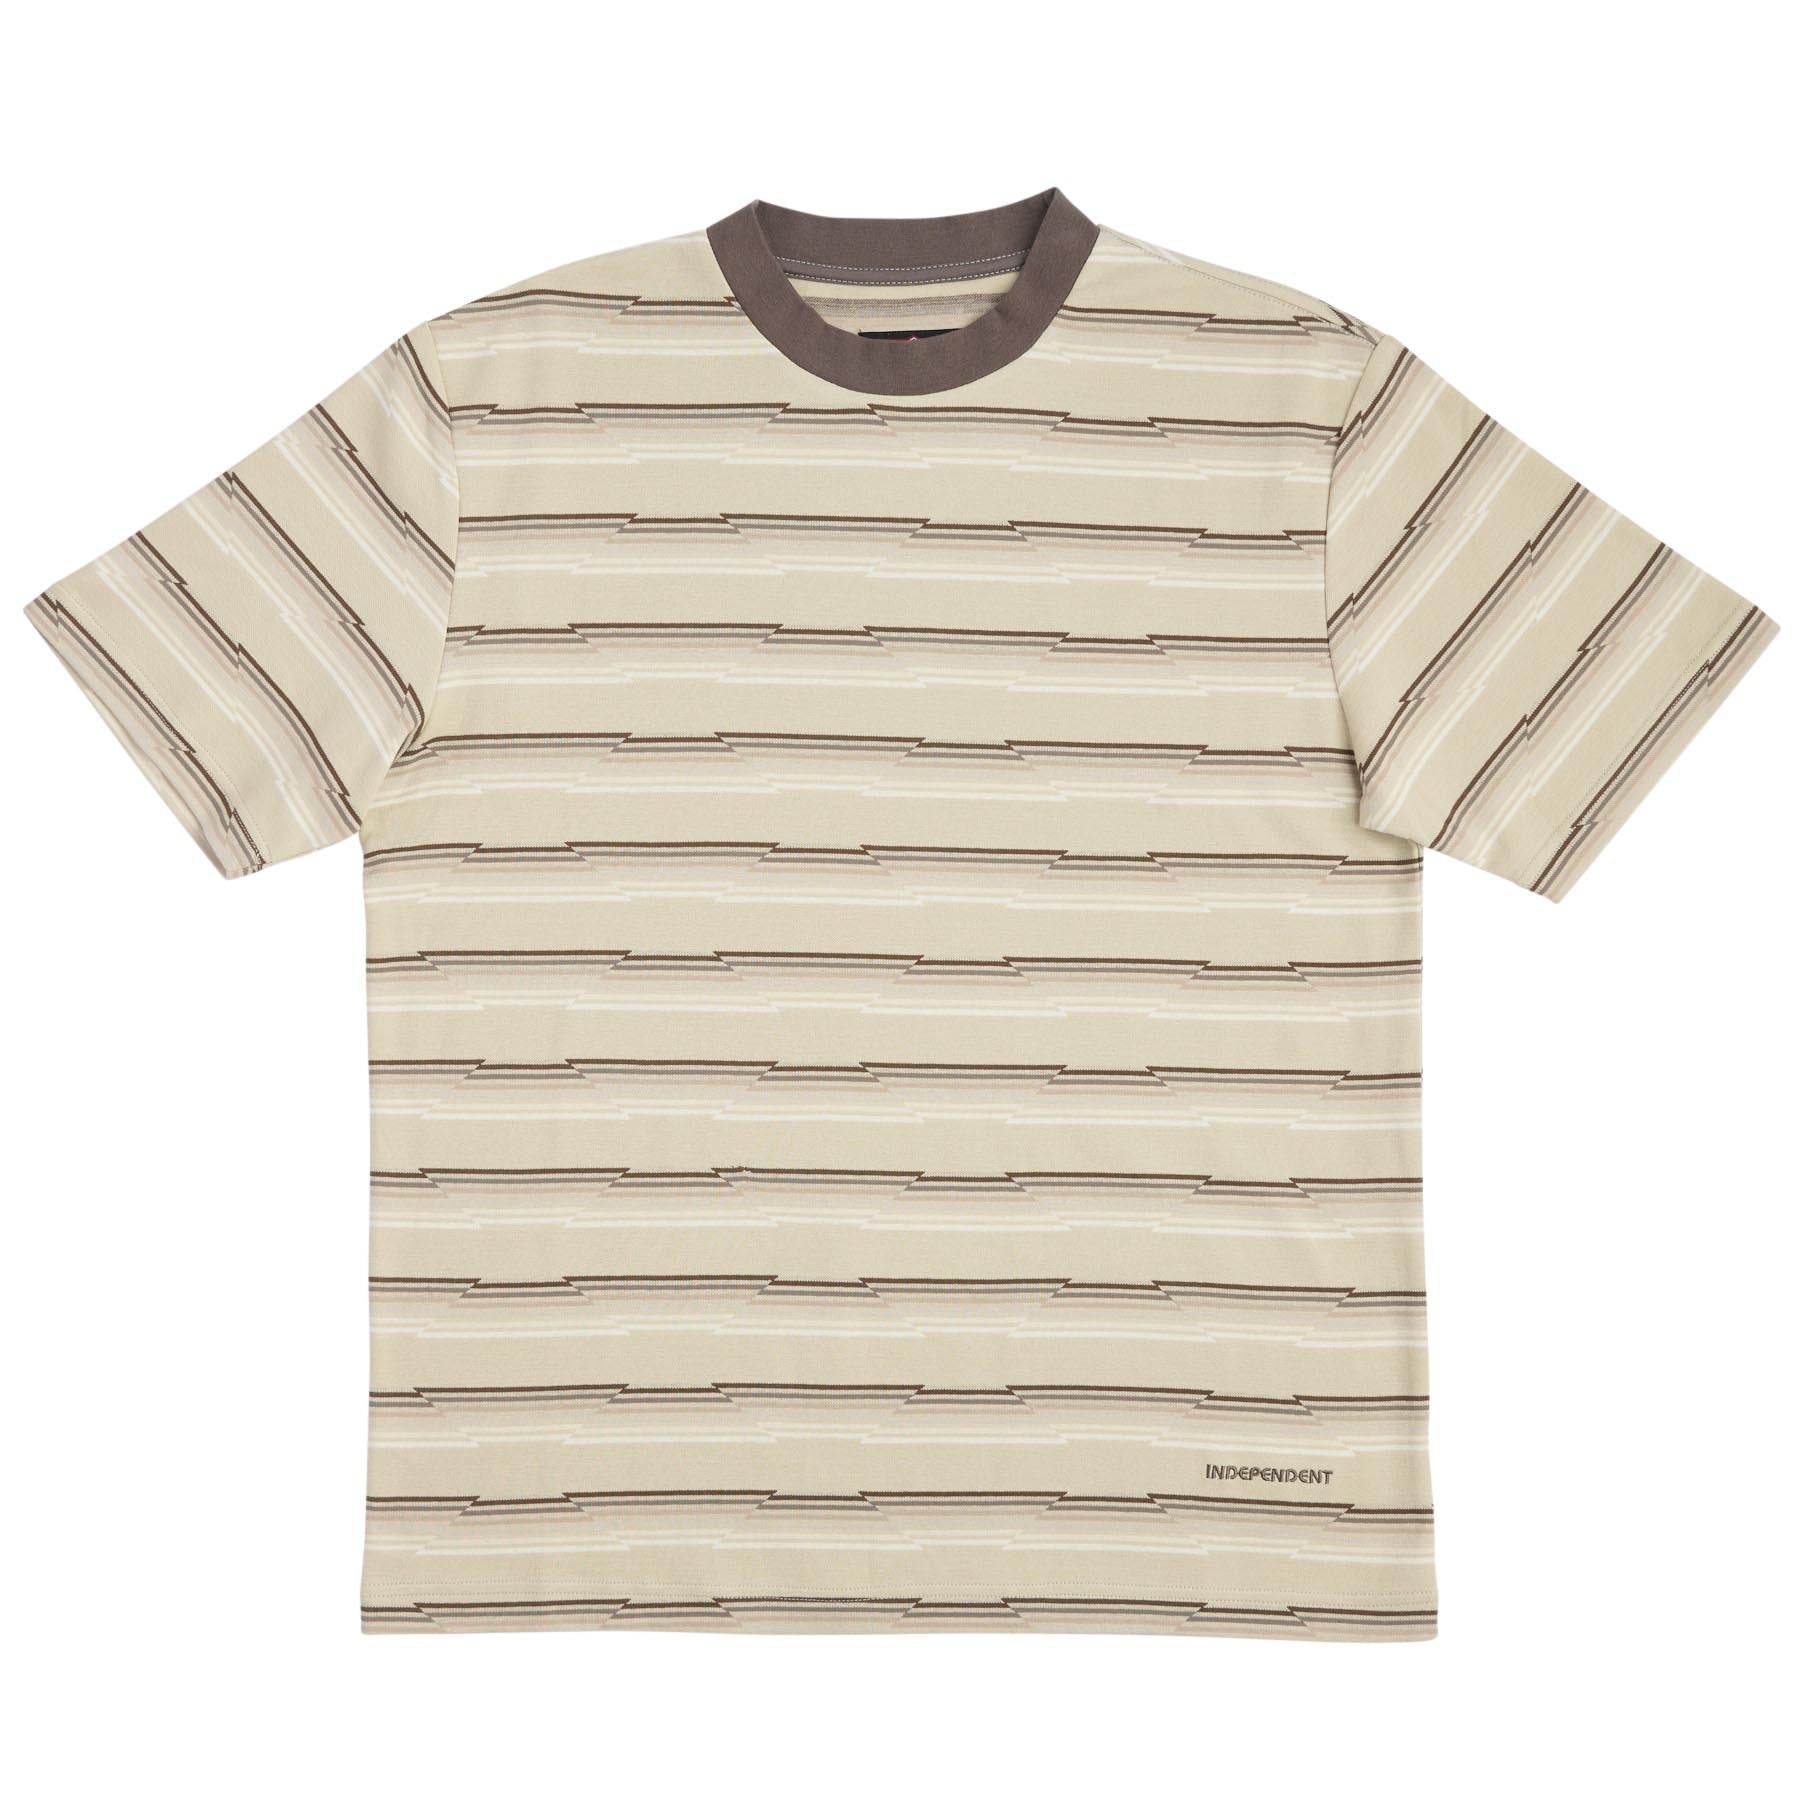 Wired S/S Ringer Tee - Sand